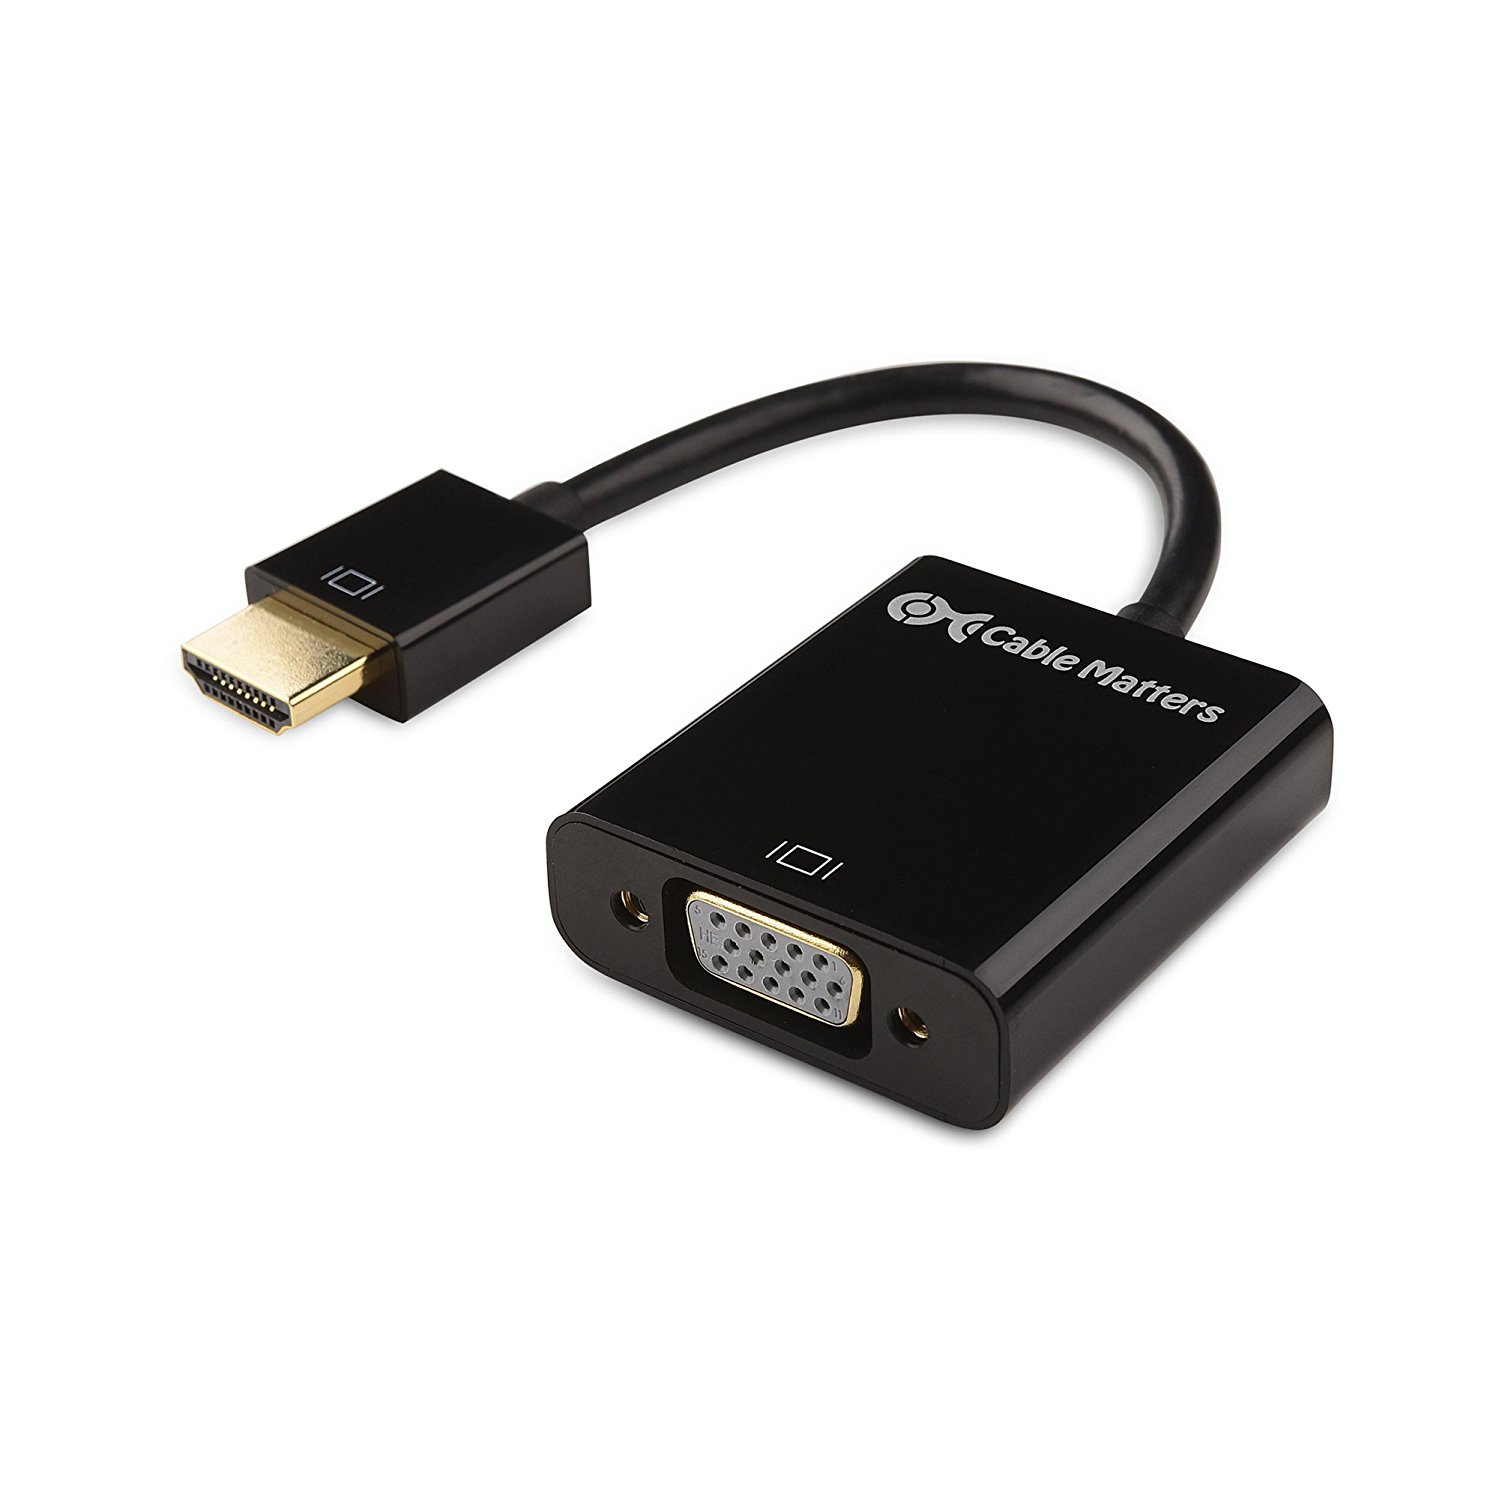 Cable Matters DisplayPort to VGA Cable (DP to VGA Cable) 6 Feet